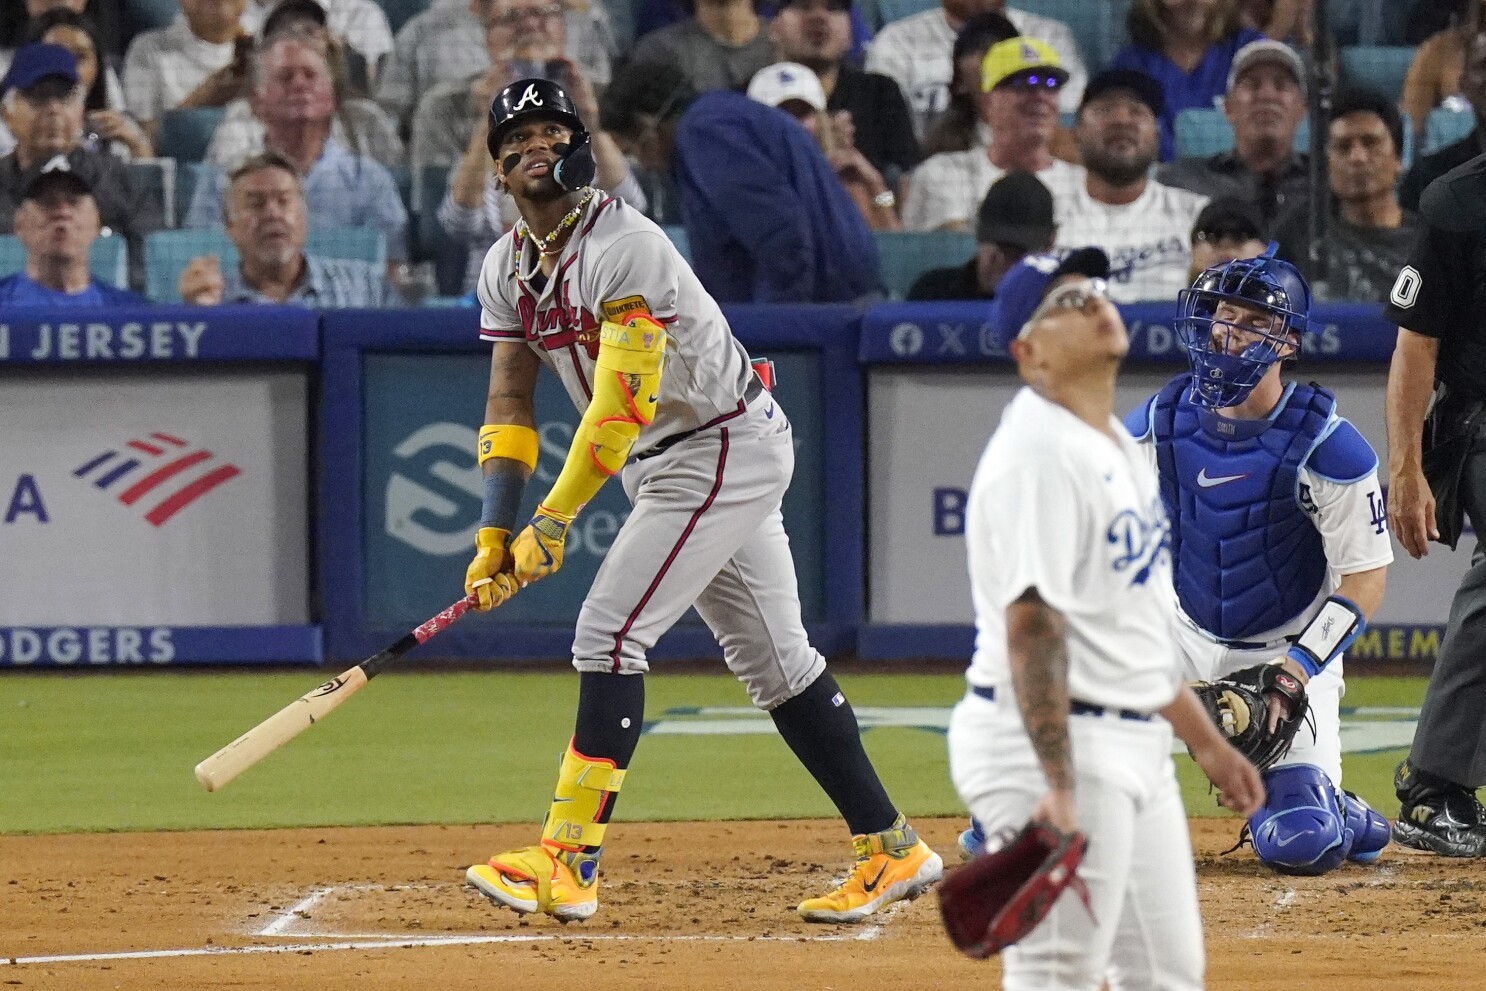 Acuña homers again against Dodgers as Braves win 4-2